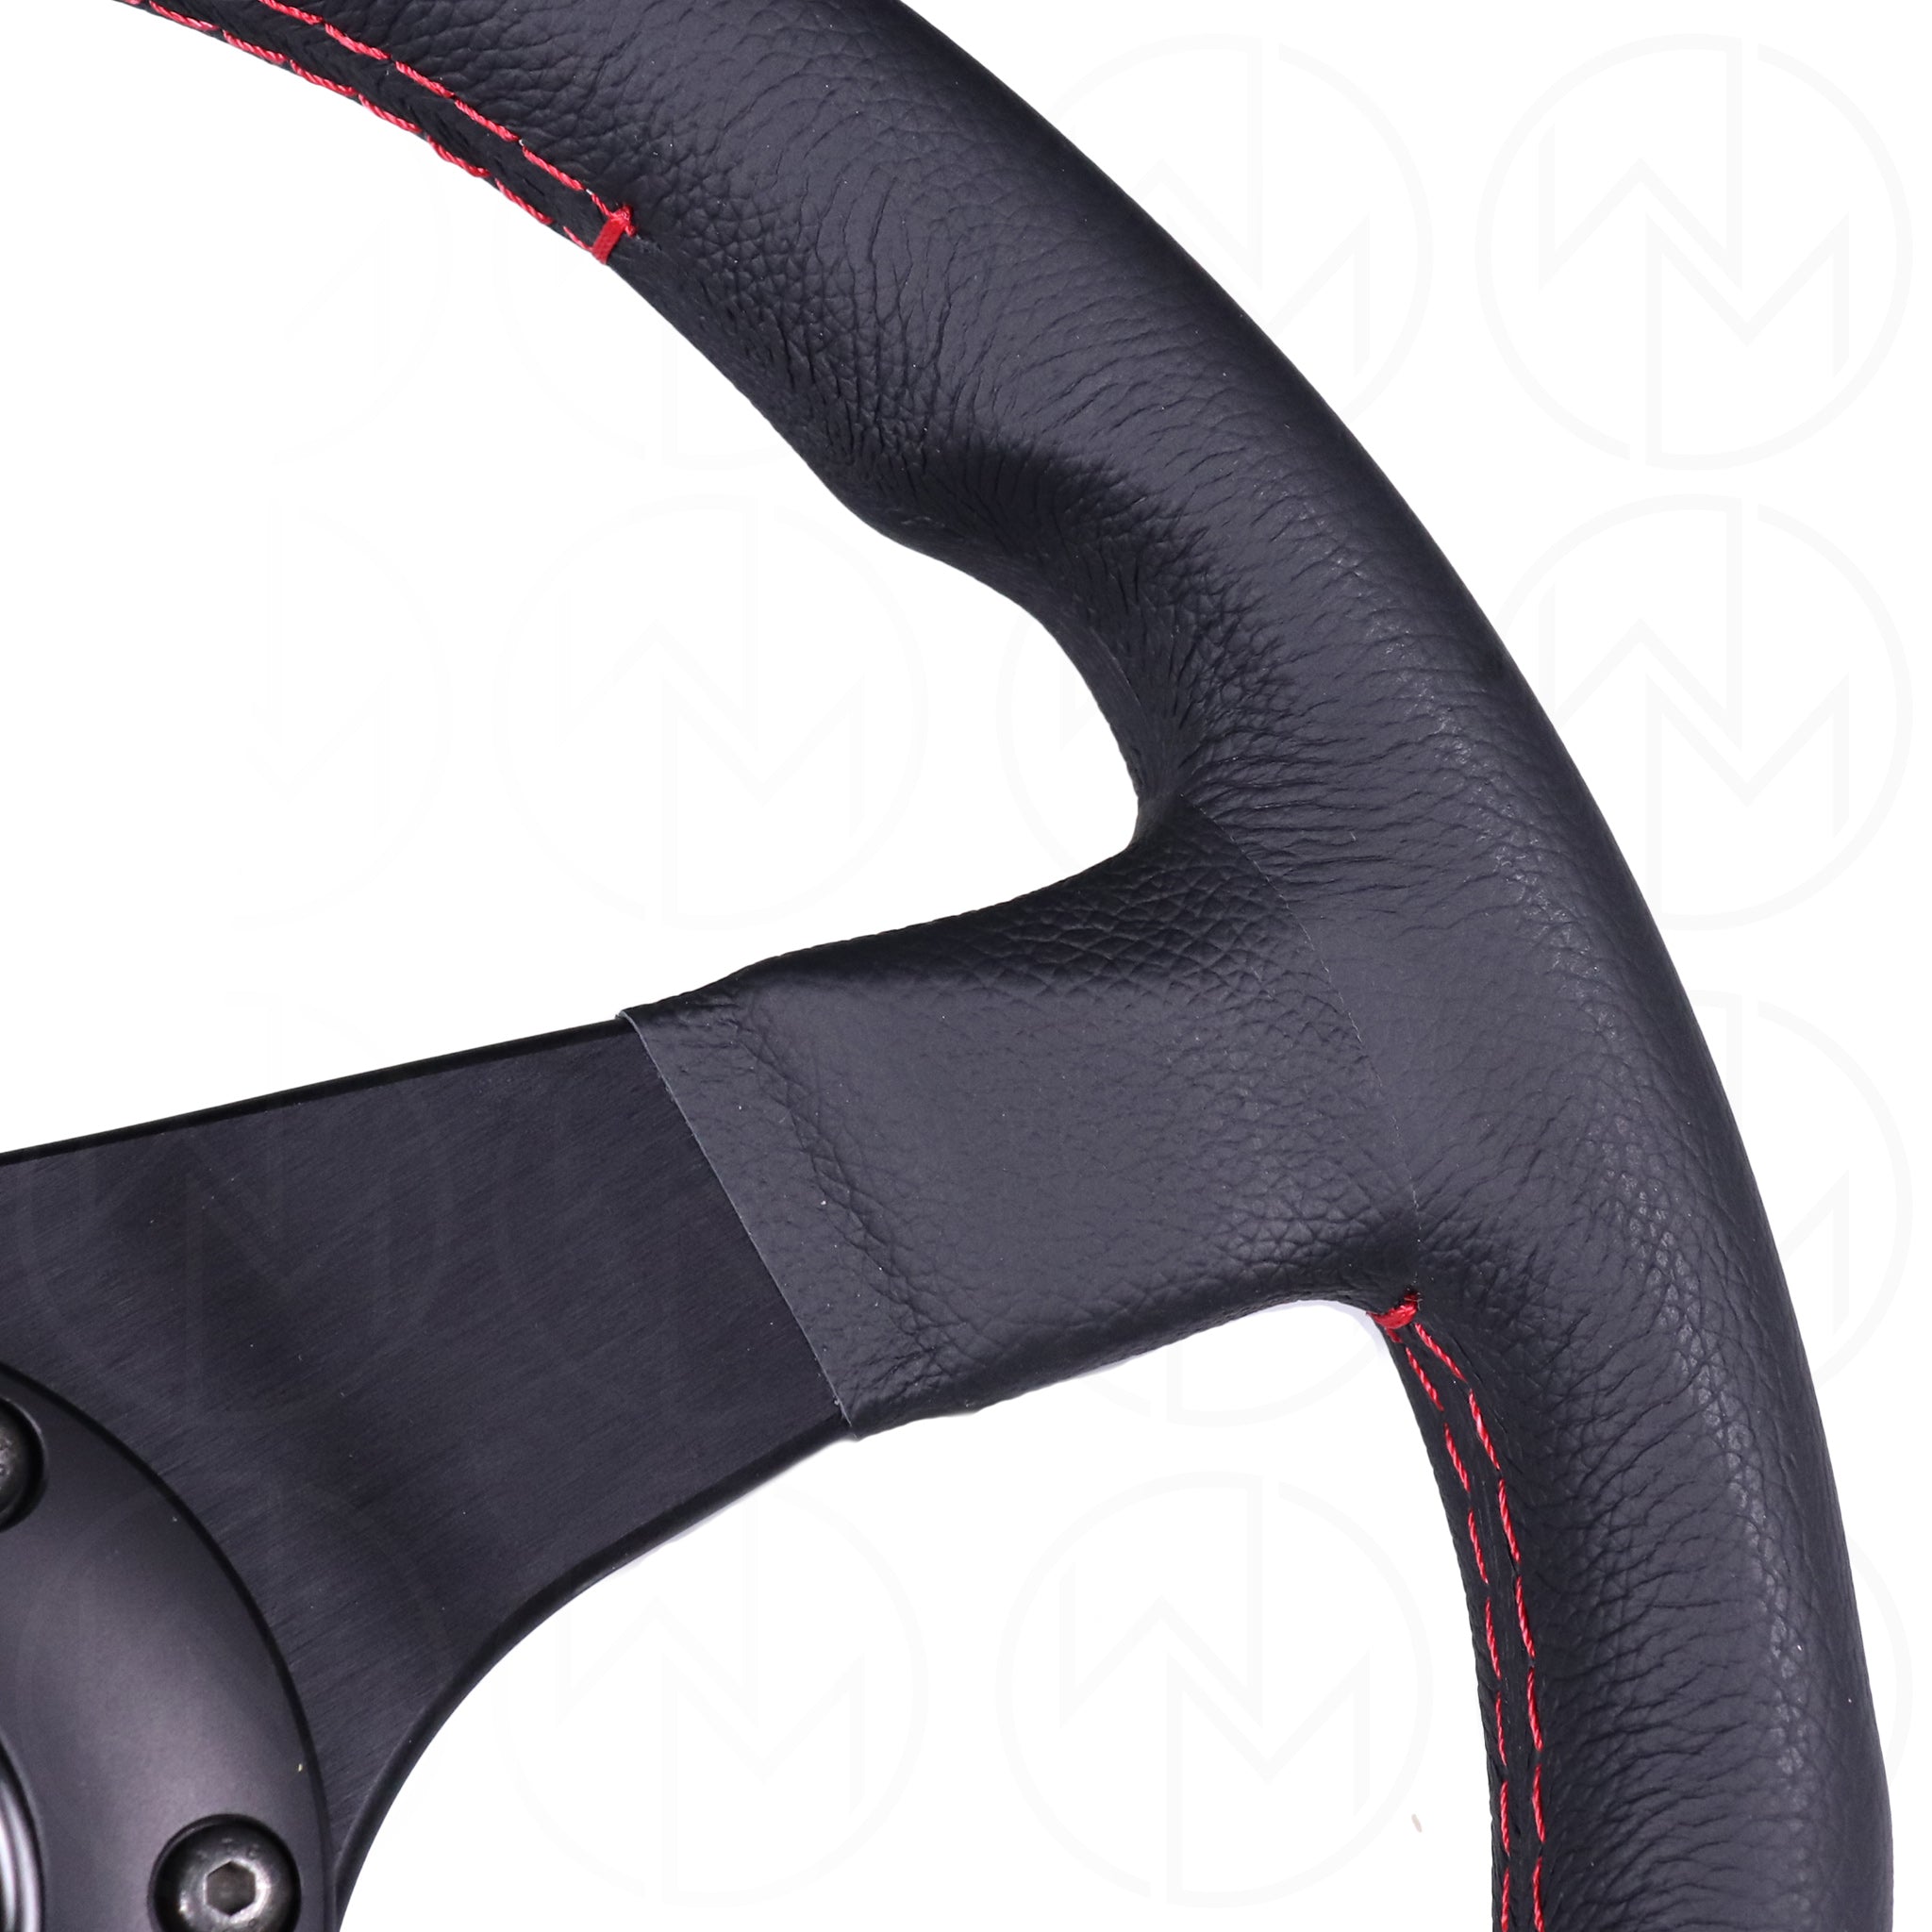 Momo Tuner Steering Wheel - 320mm Leather w/Red Stitch